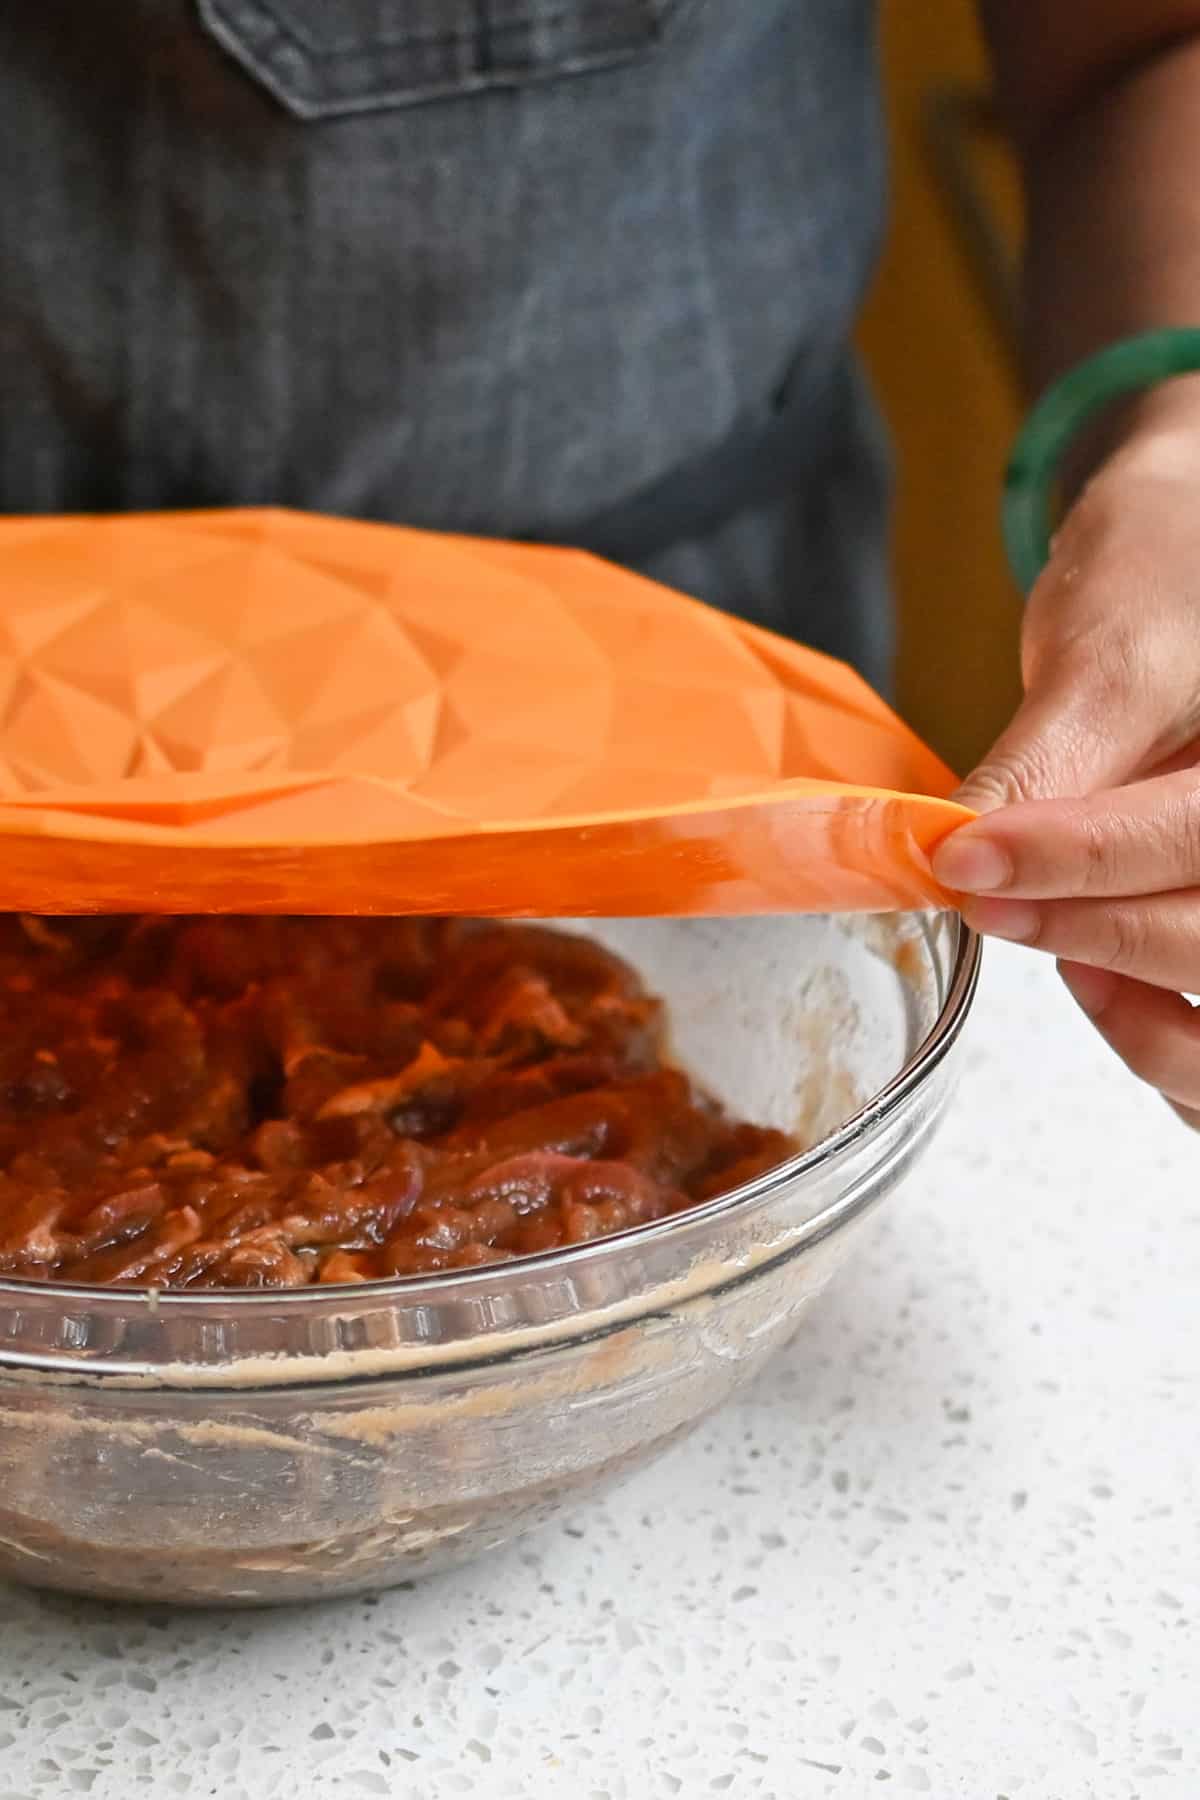 Placing an orange silicone lid on top of a bowl filled with marinated bulgogi beef.